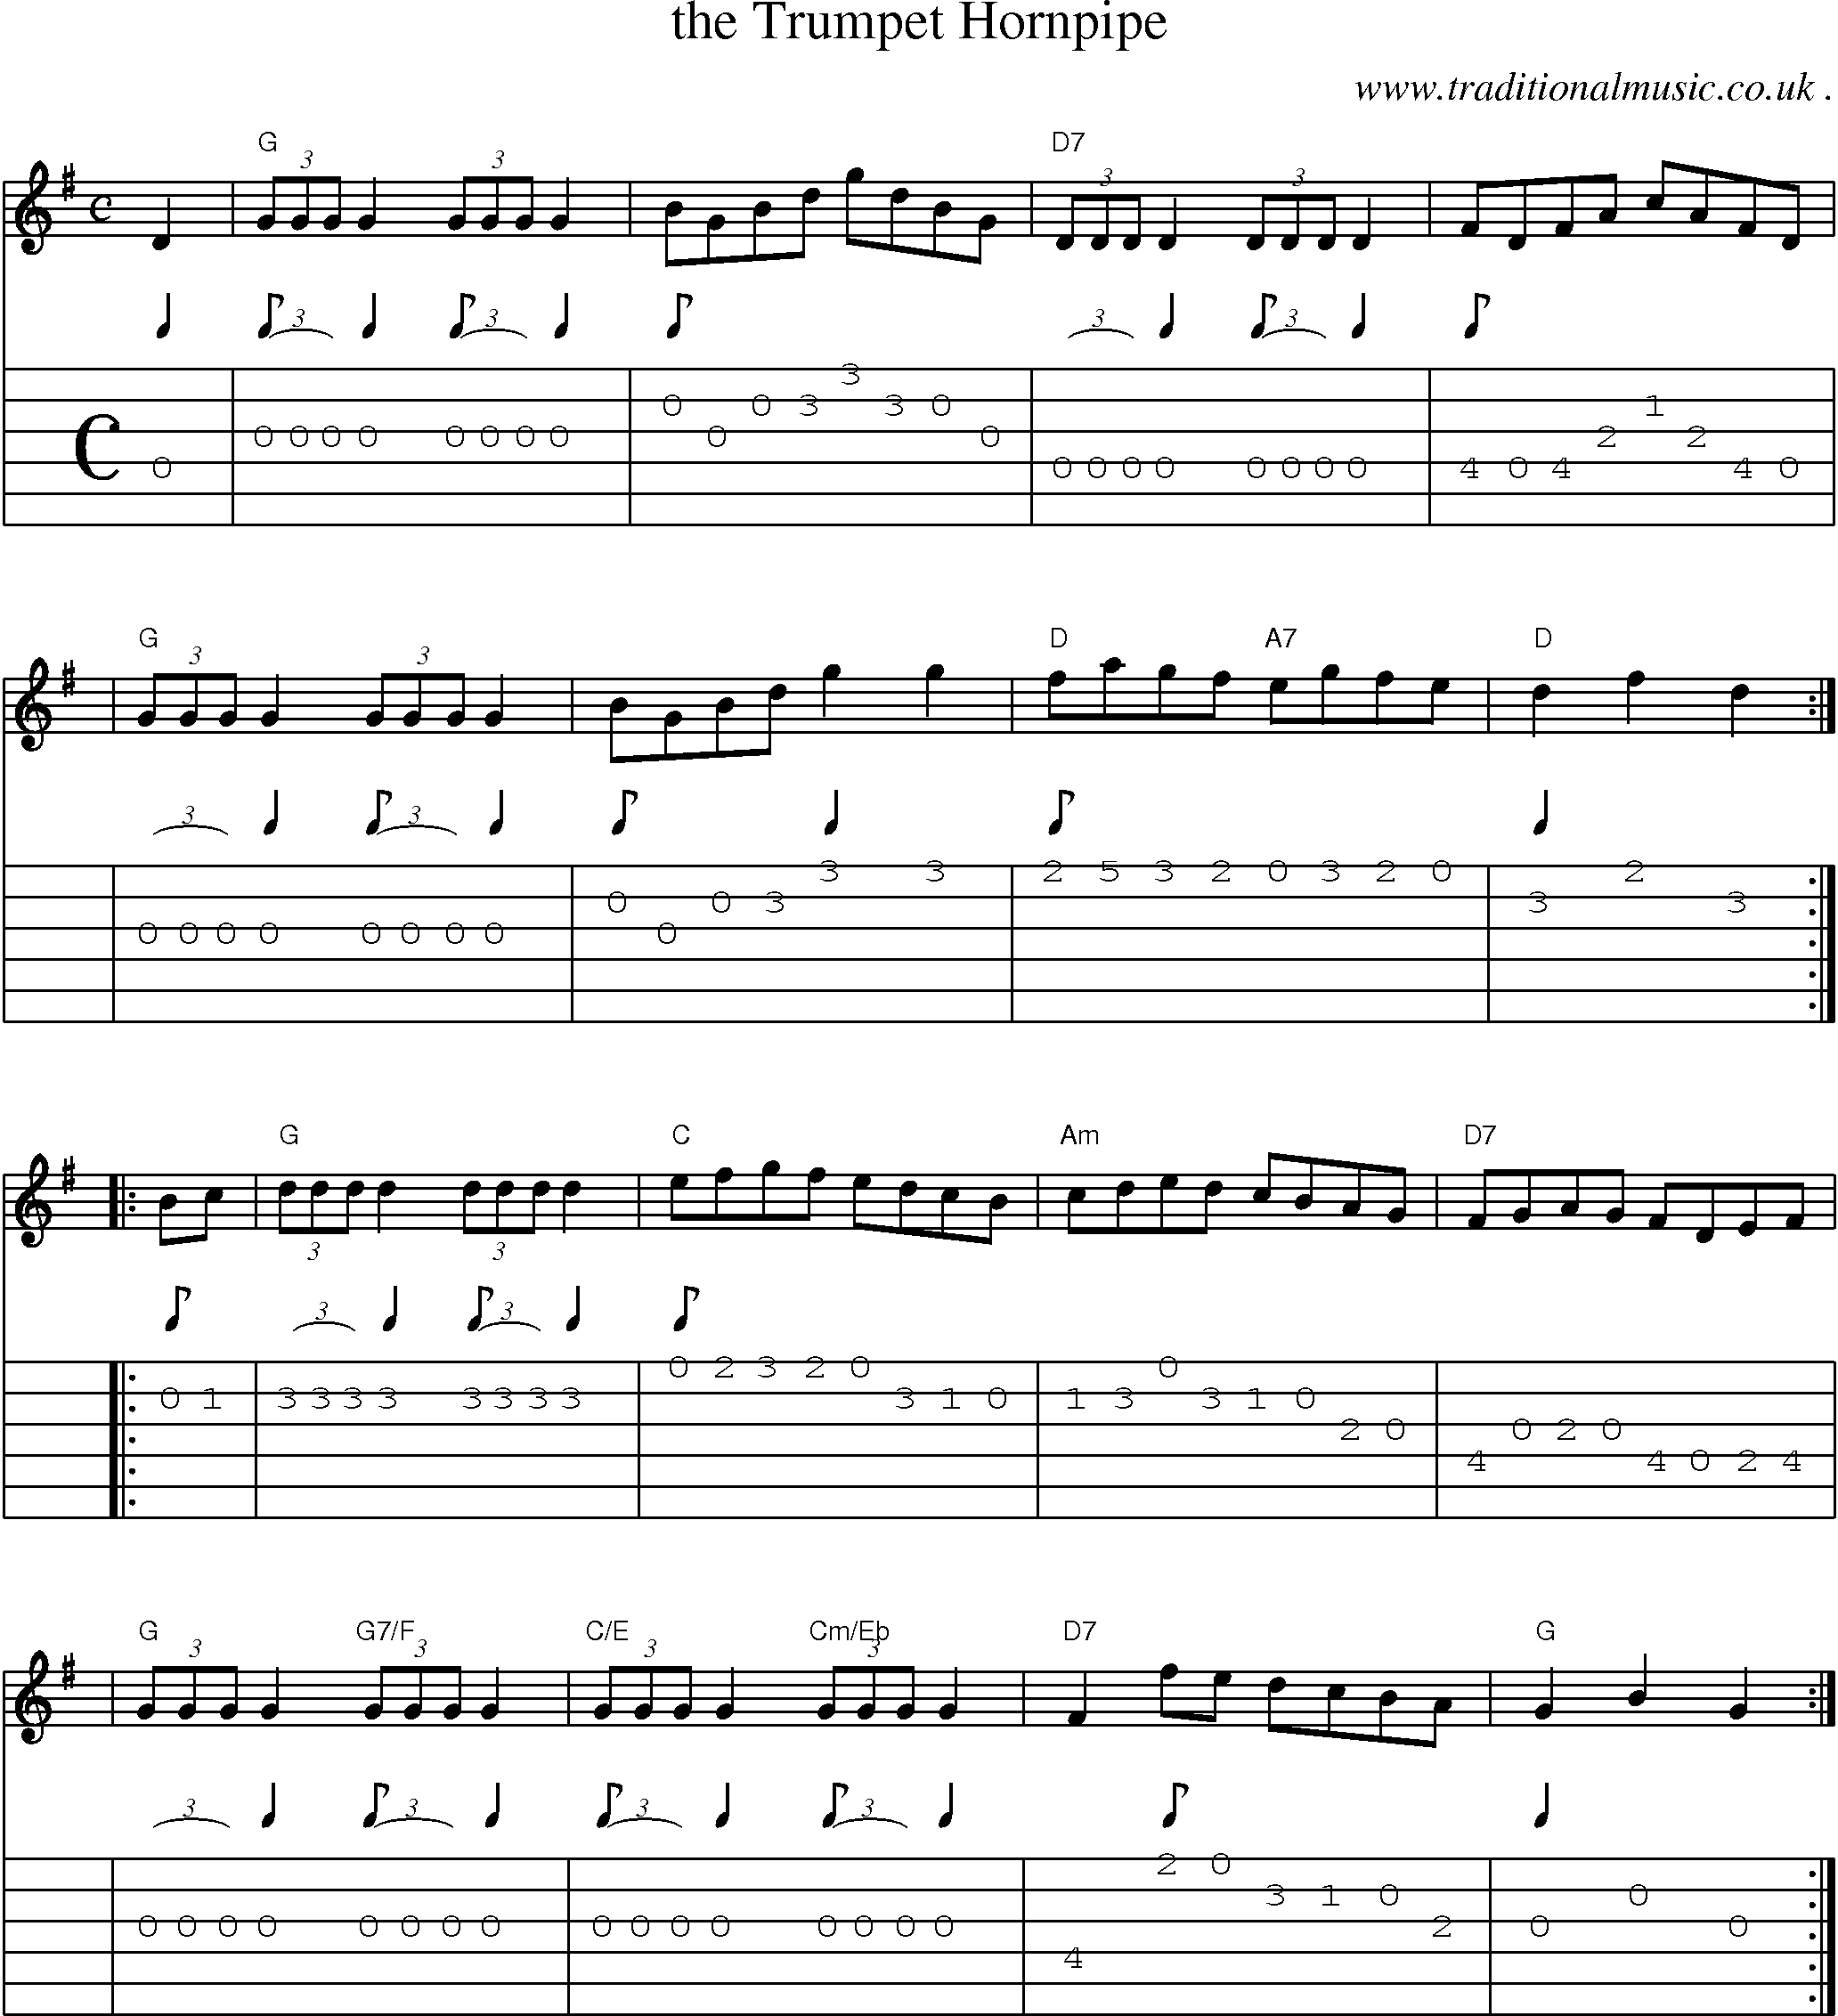 Sheet-music  score, Chords and Guitar Tabs for The Trumpet Hornpipe